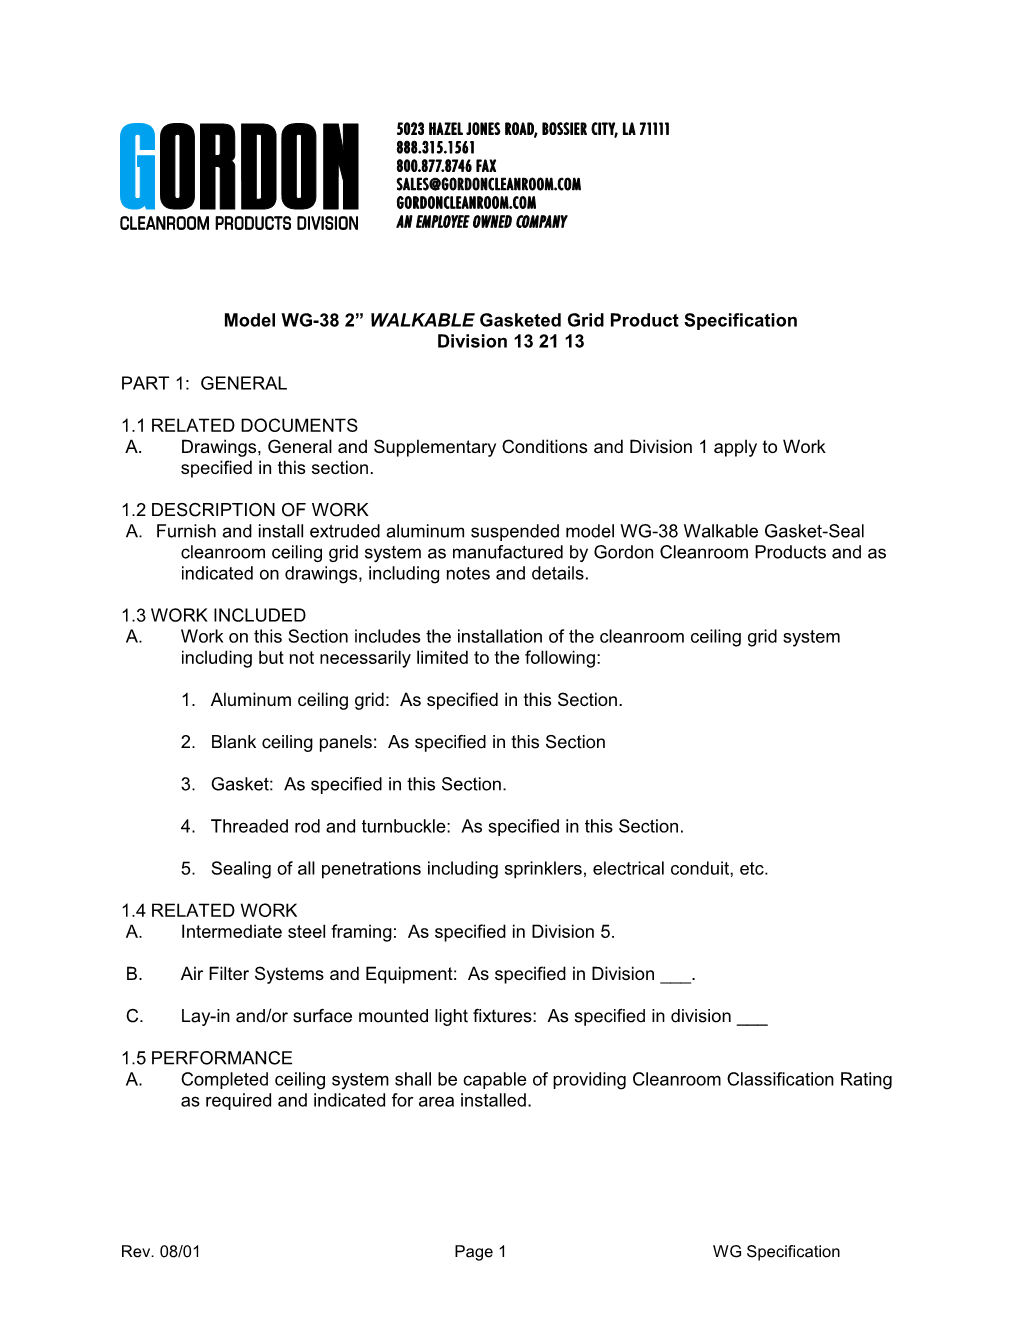 Model WG-38 2 WALKABLE Gasketed Grid Product Specification